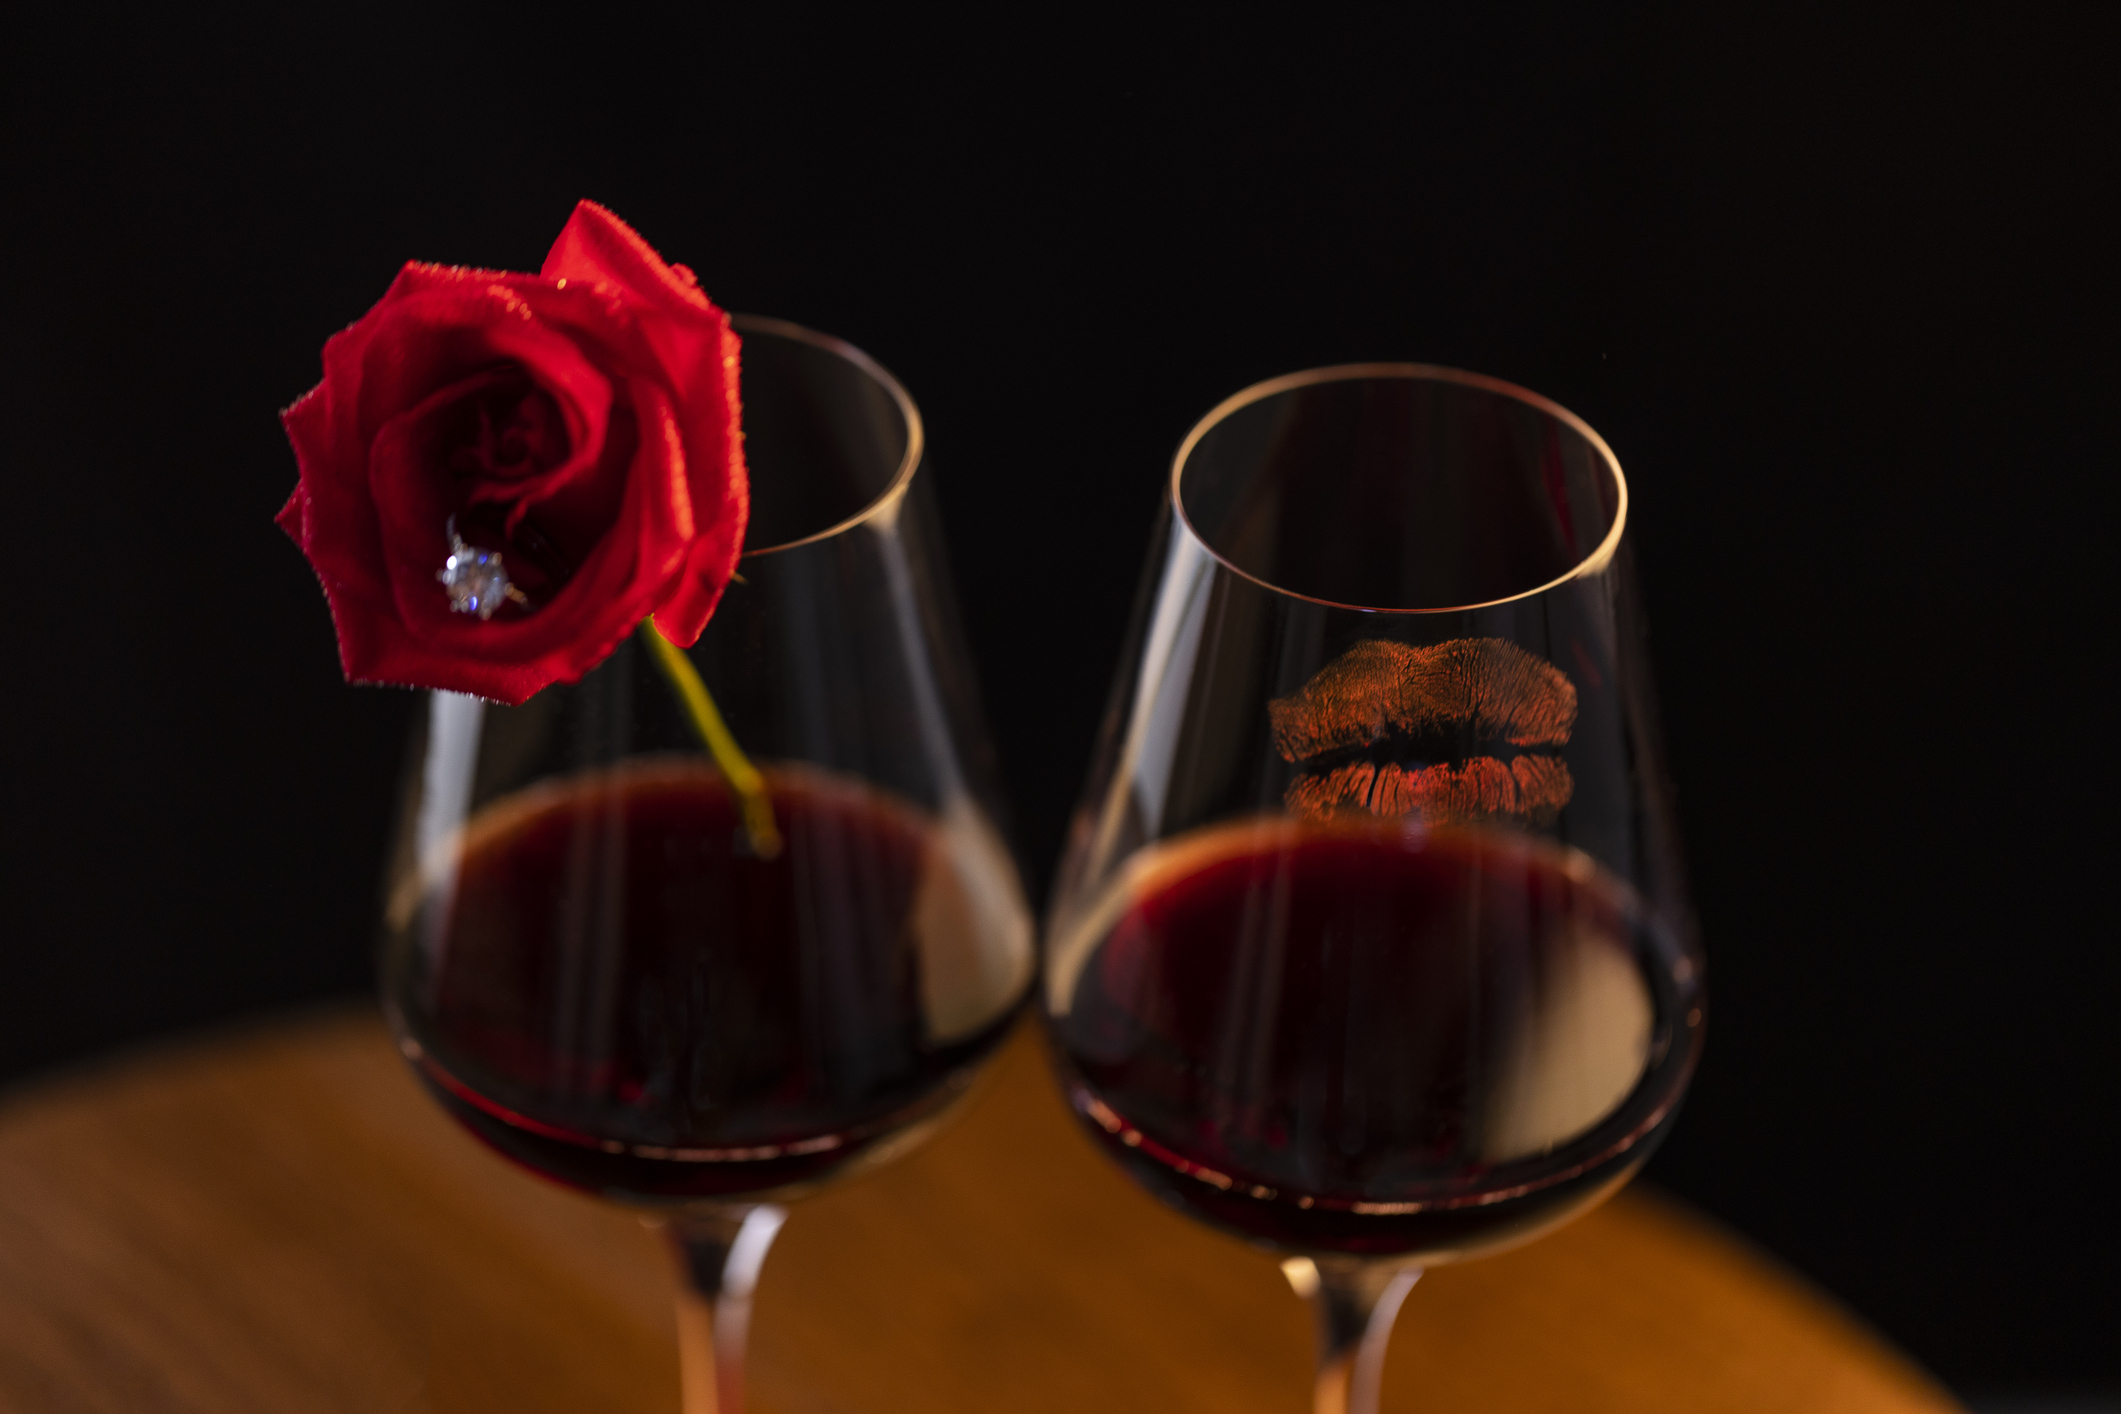 Two wine glasses filled with red wine; one has a red rose resting on it, the other has lipstick marks on its rim